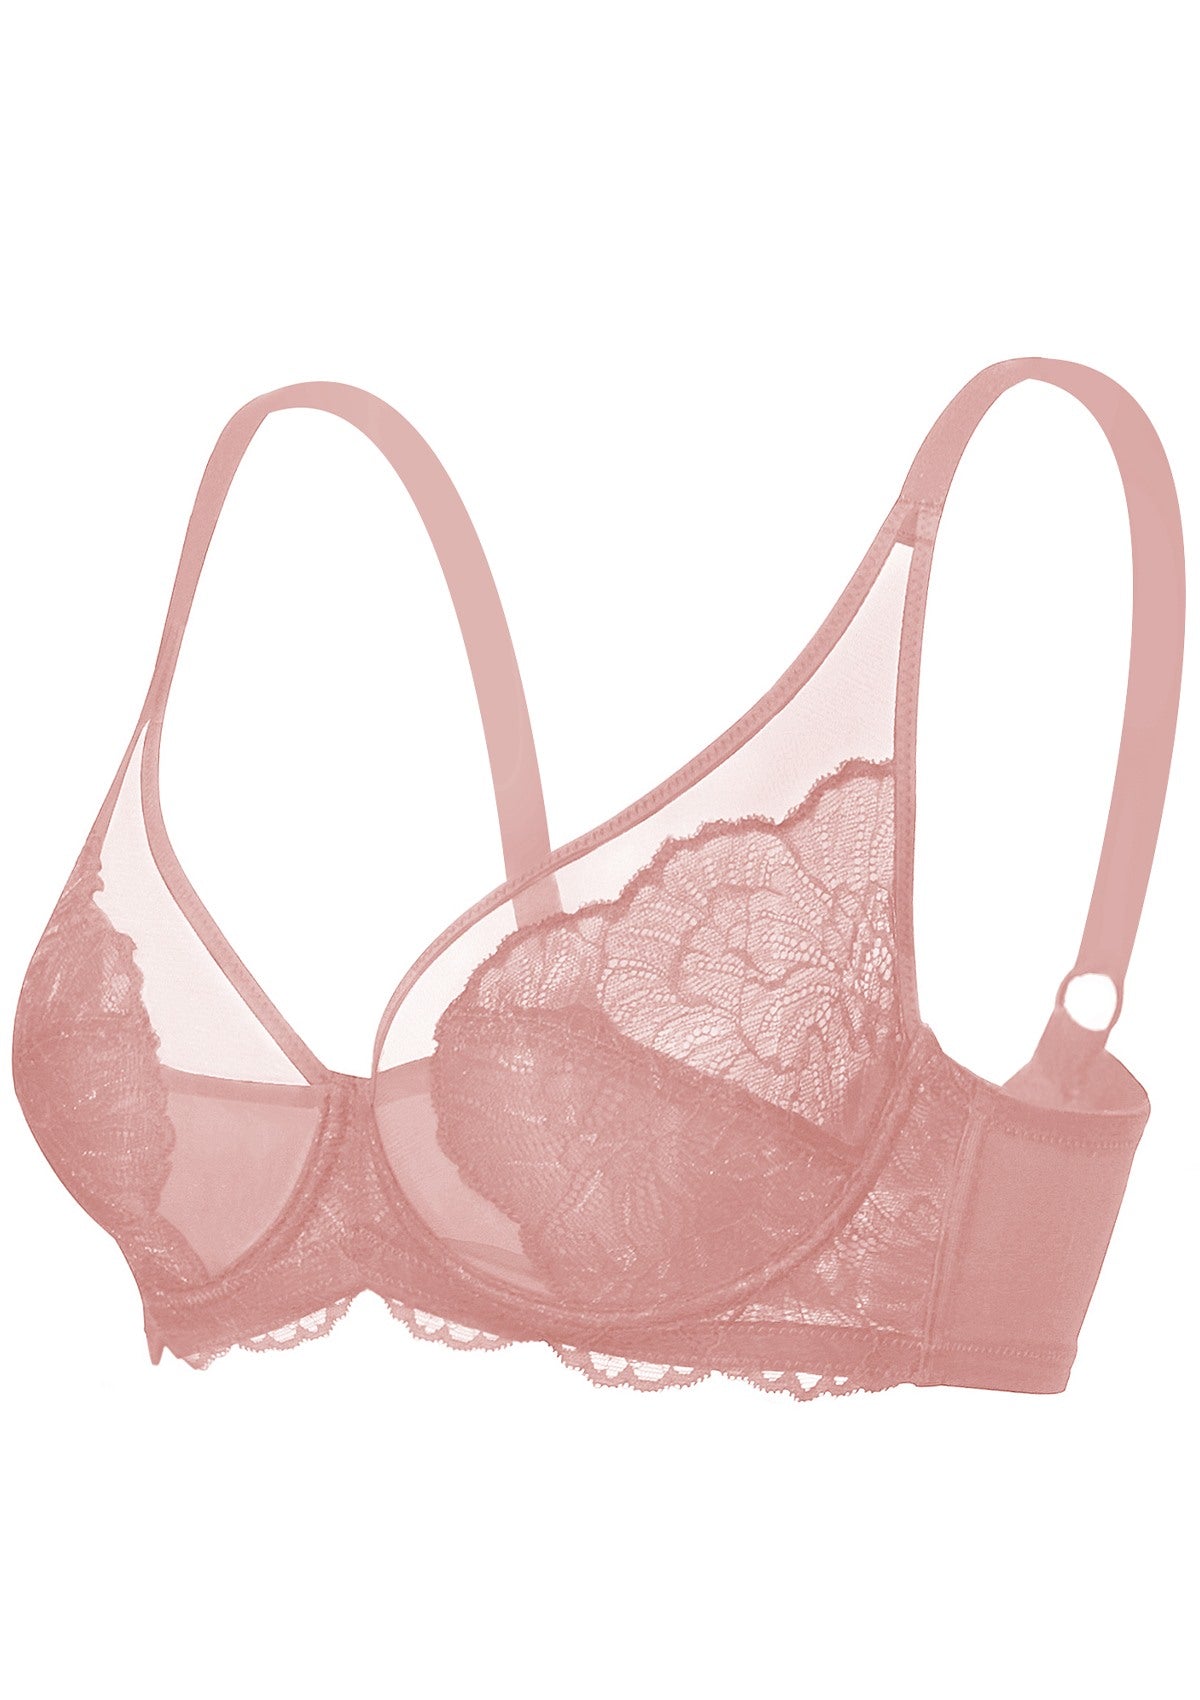 HSIA Blossom Unlined Lace Underwire Bra - Raspberry / 46 / D